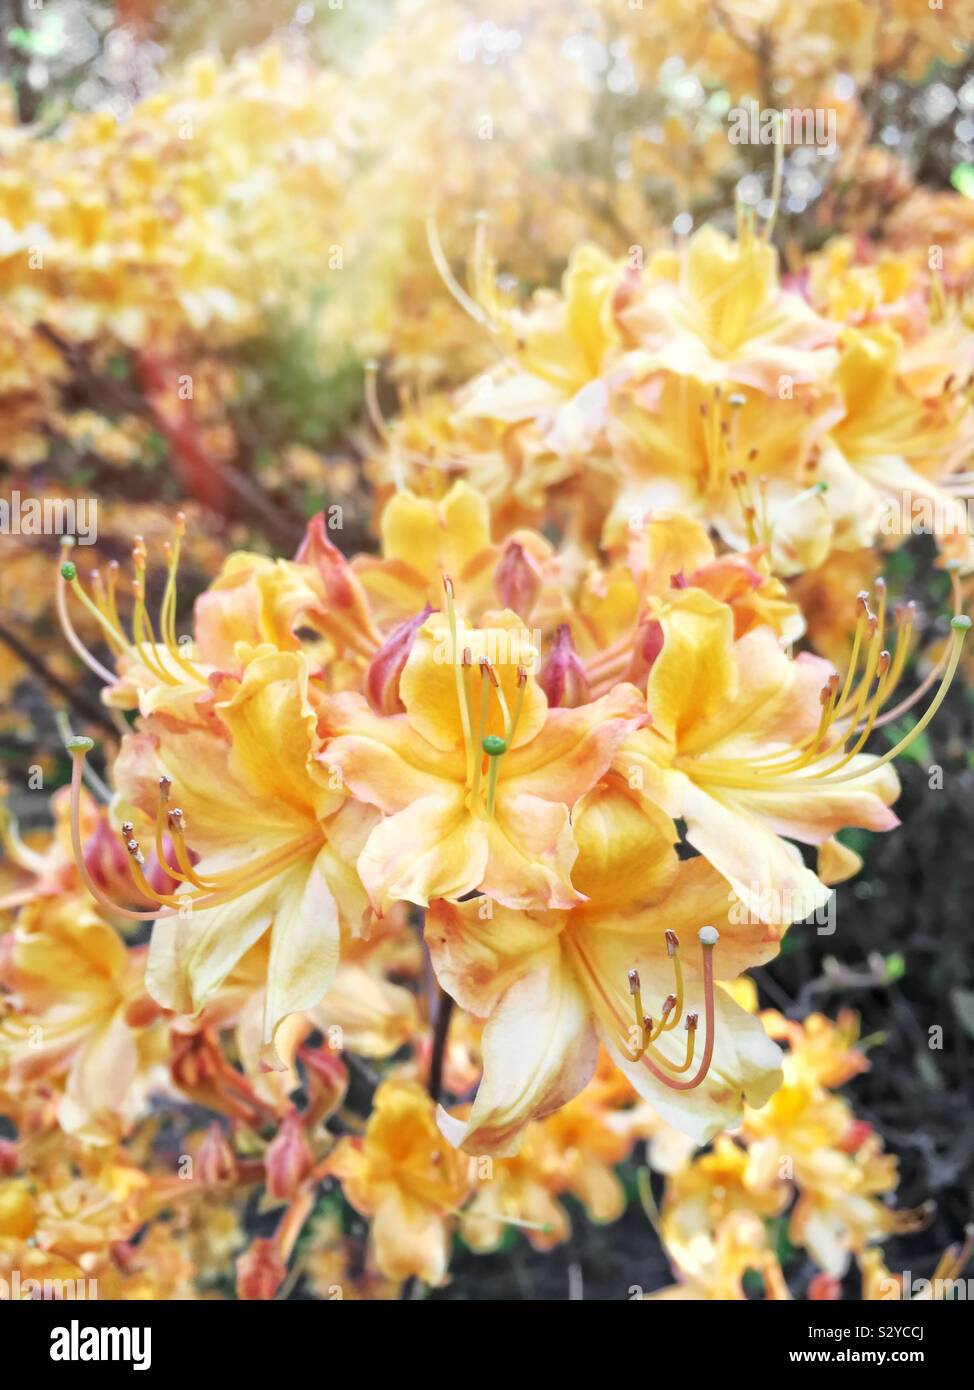 A garden full of yellow colored native azalea flowers in full bloom. Focus on the foreground Stock Photo